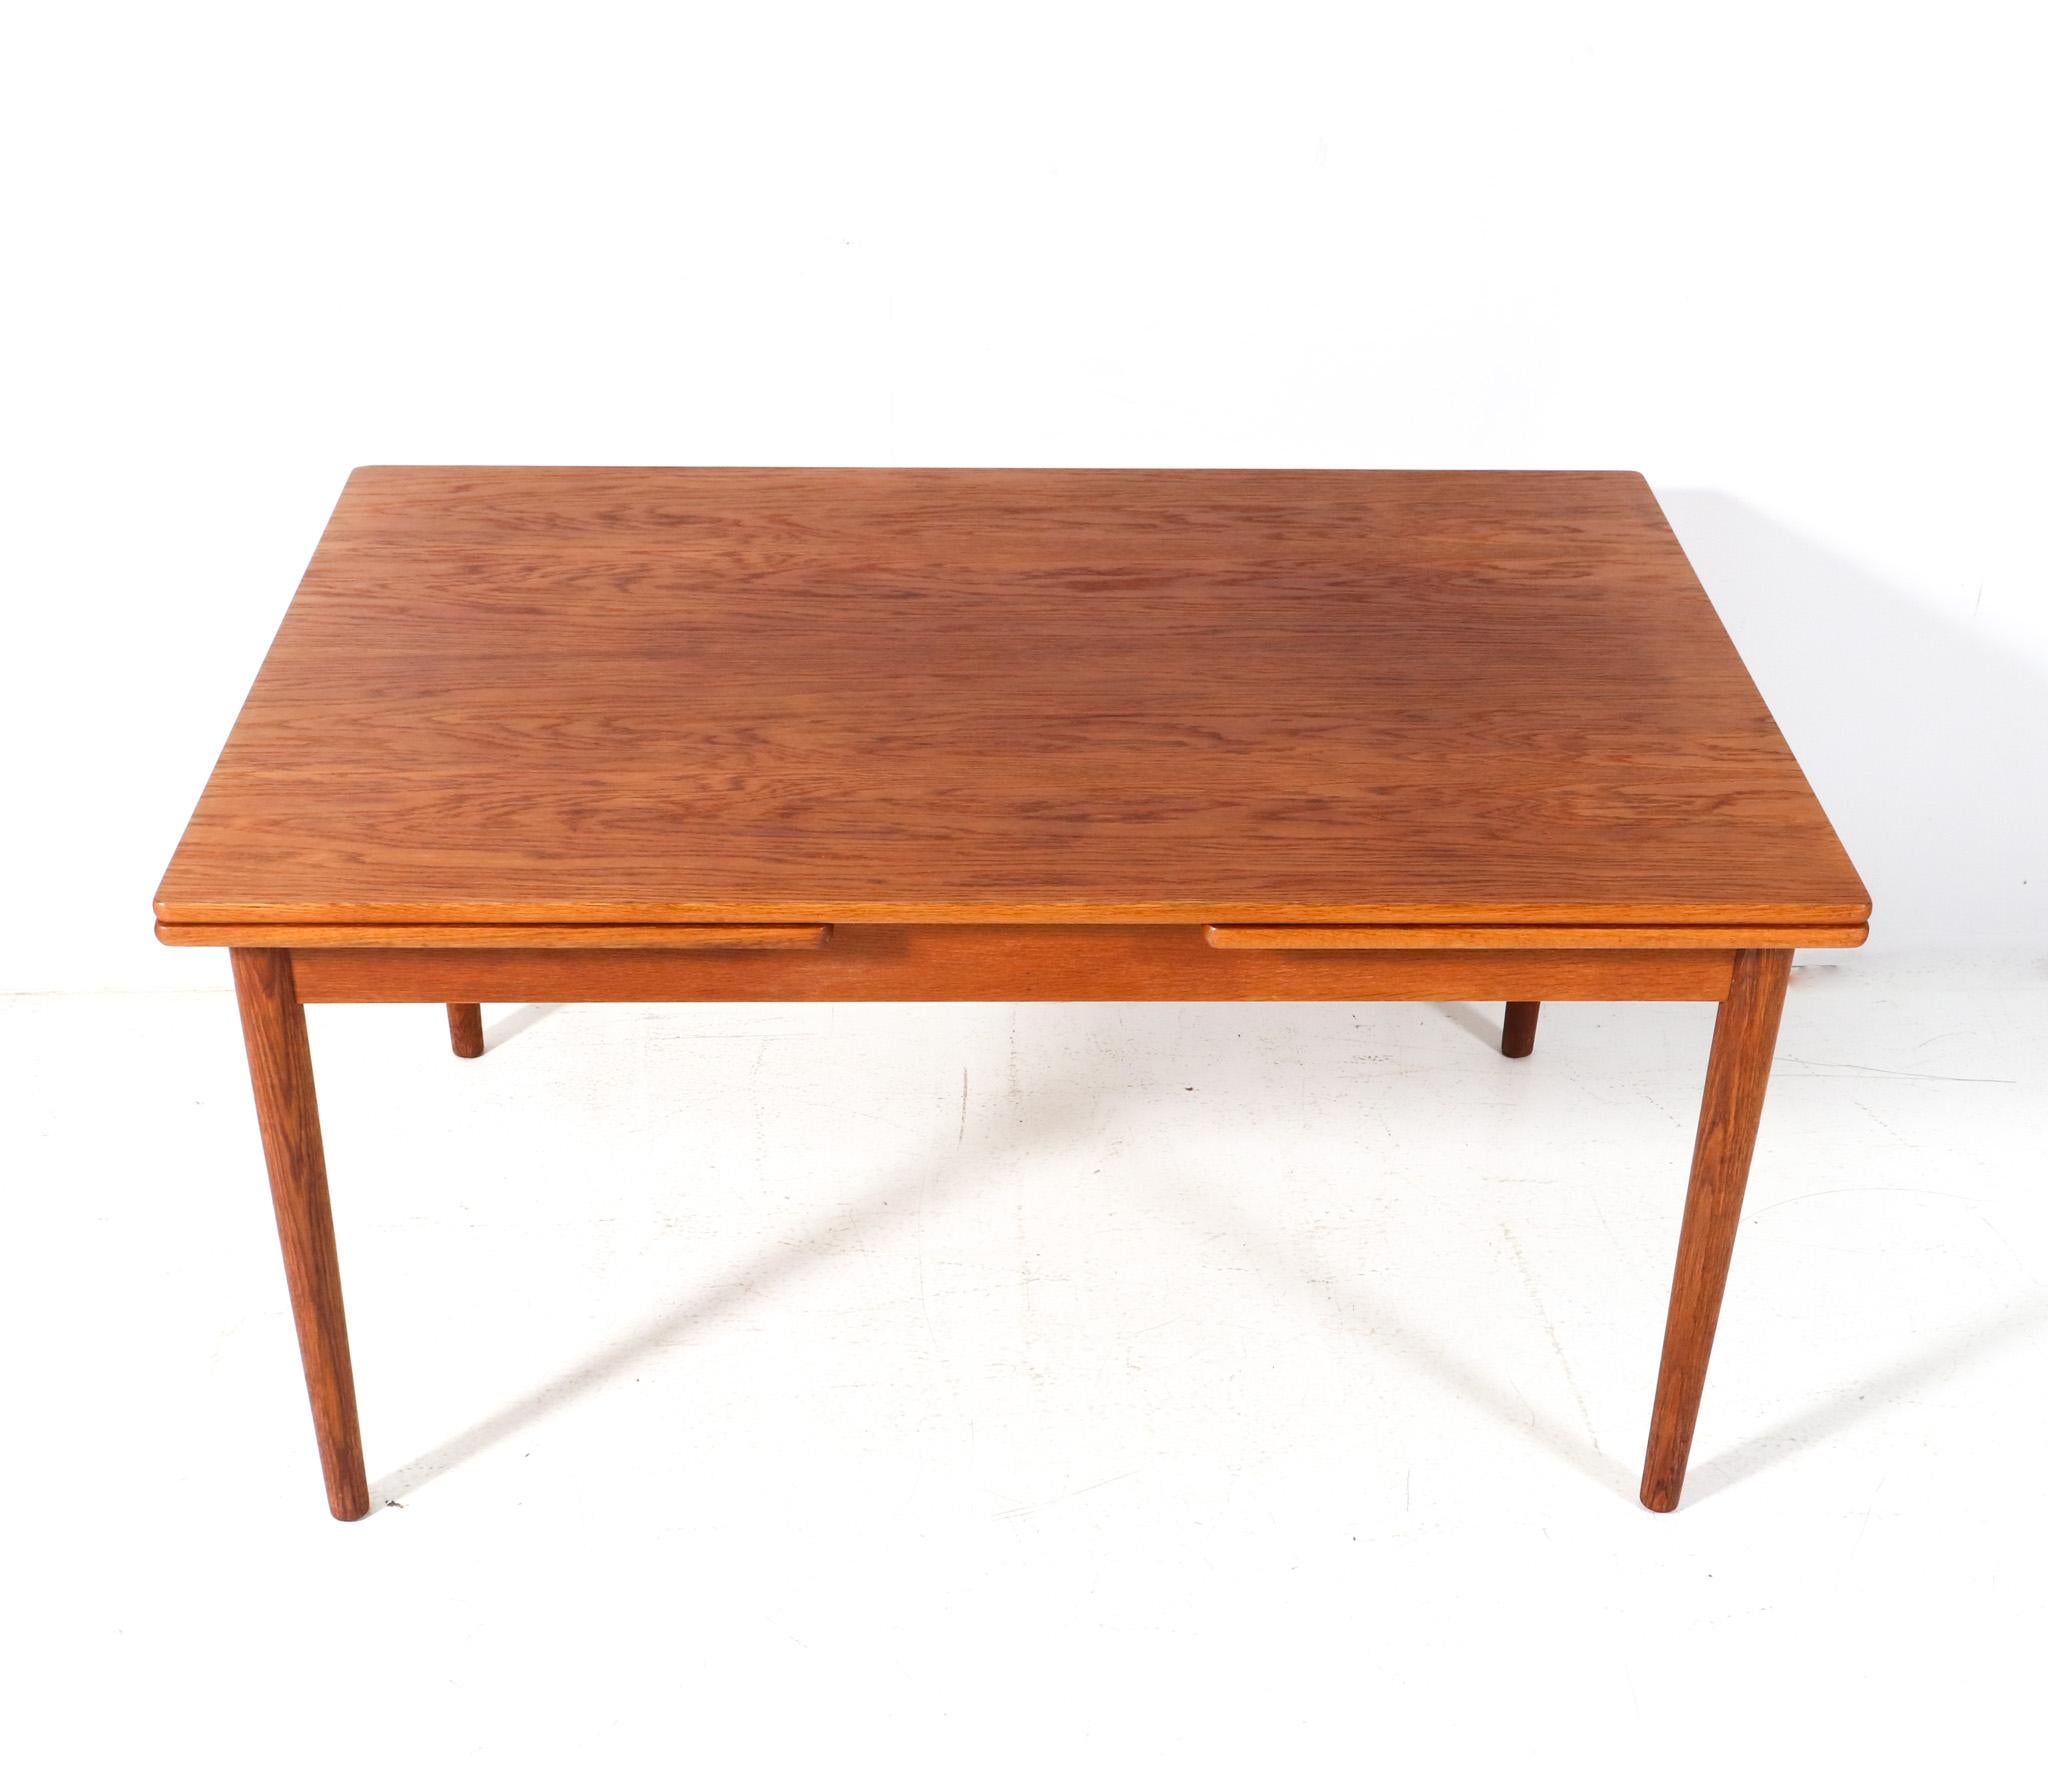 Mid-20th Century  Mid-Century Modern Oak AT-316 Dining Table by Hans J. Wegner for Andreas Tuck For Sale